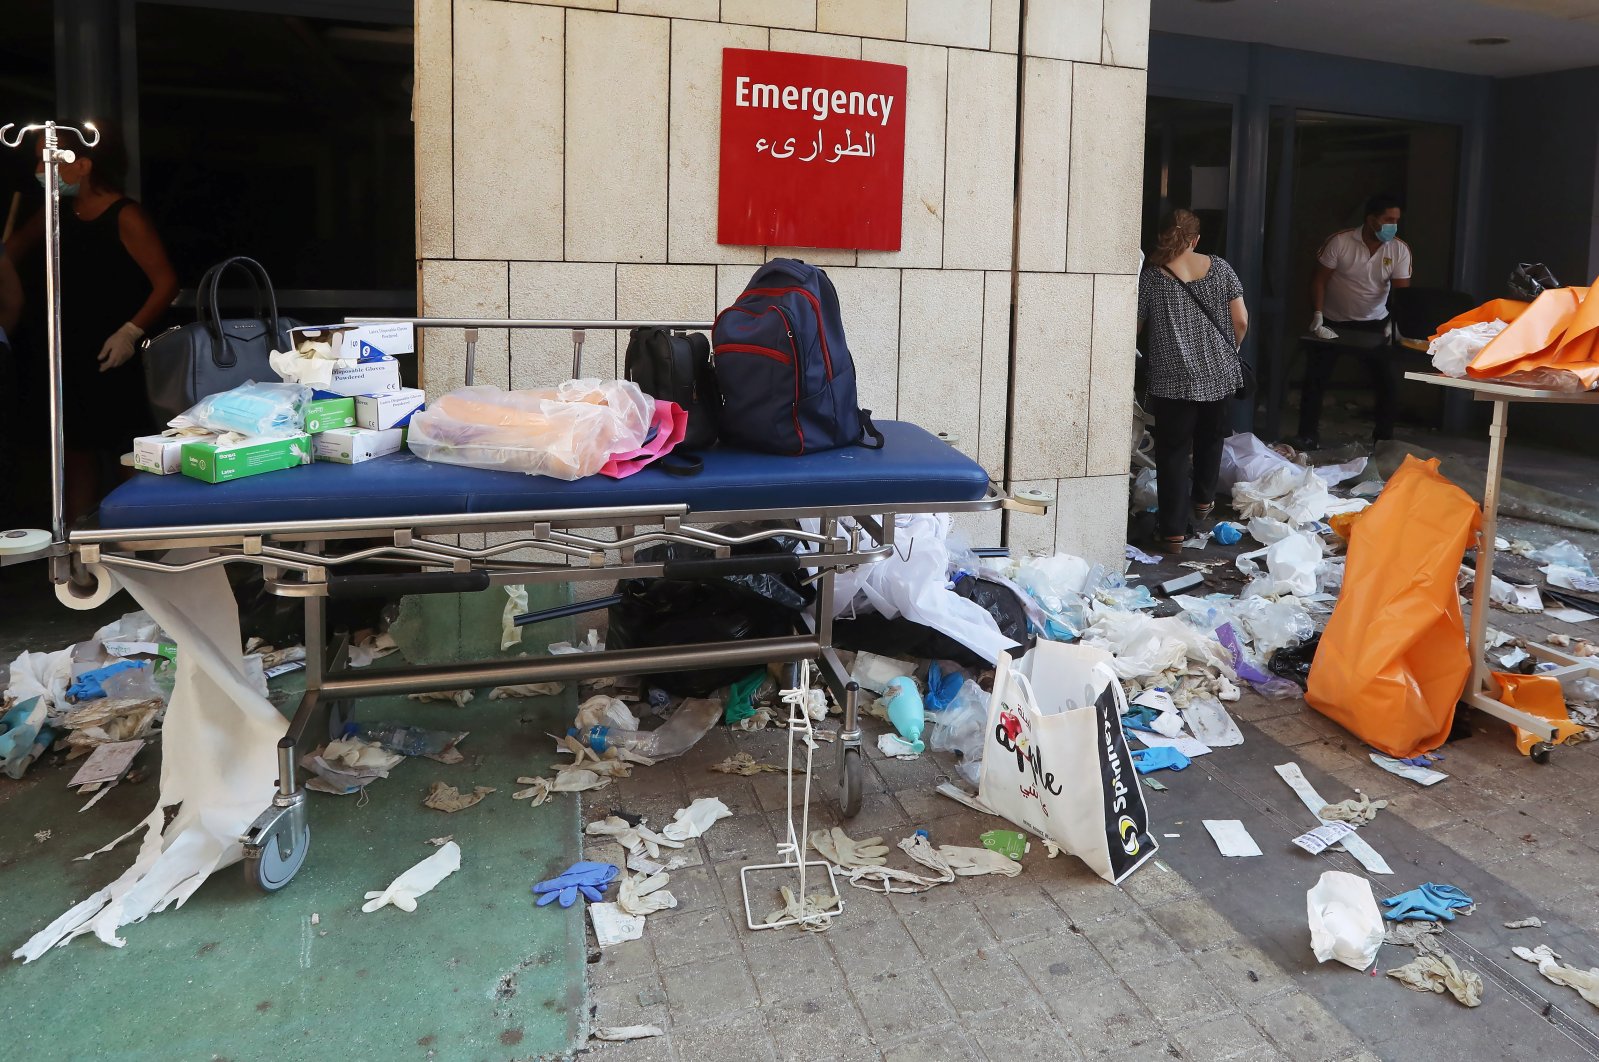 Protective gloves are scattered on the ground at a damaged hospital following the blast, Beirut, Aug. 5, 2020. (REUTERS Photo)